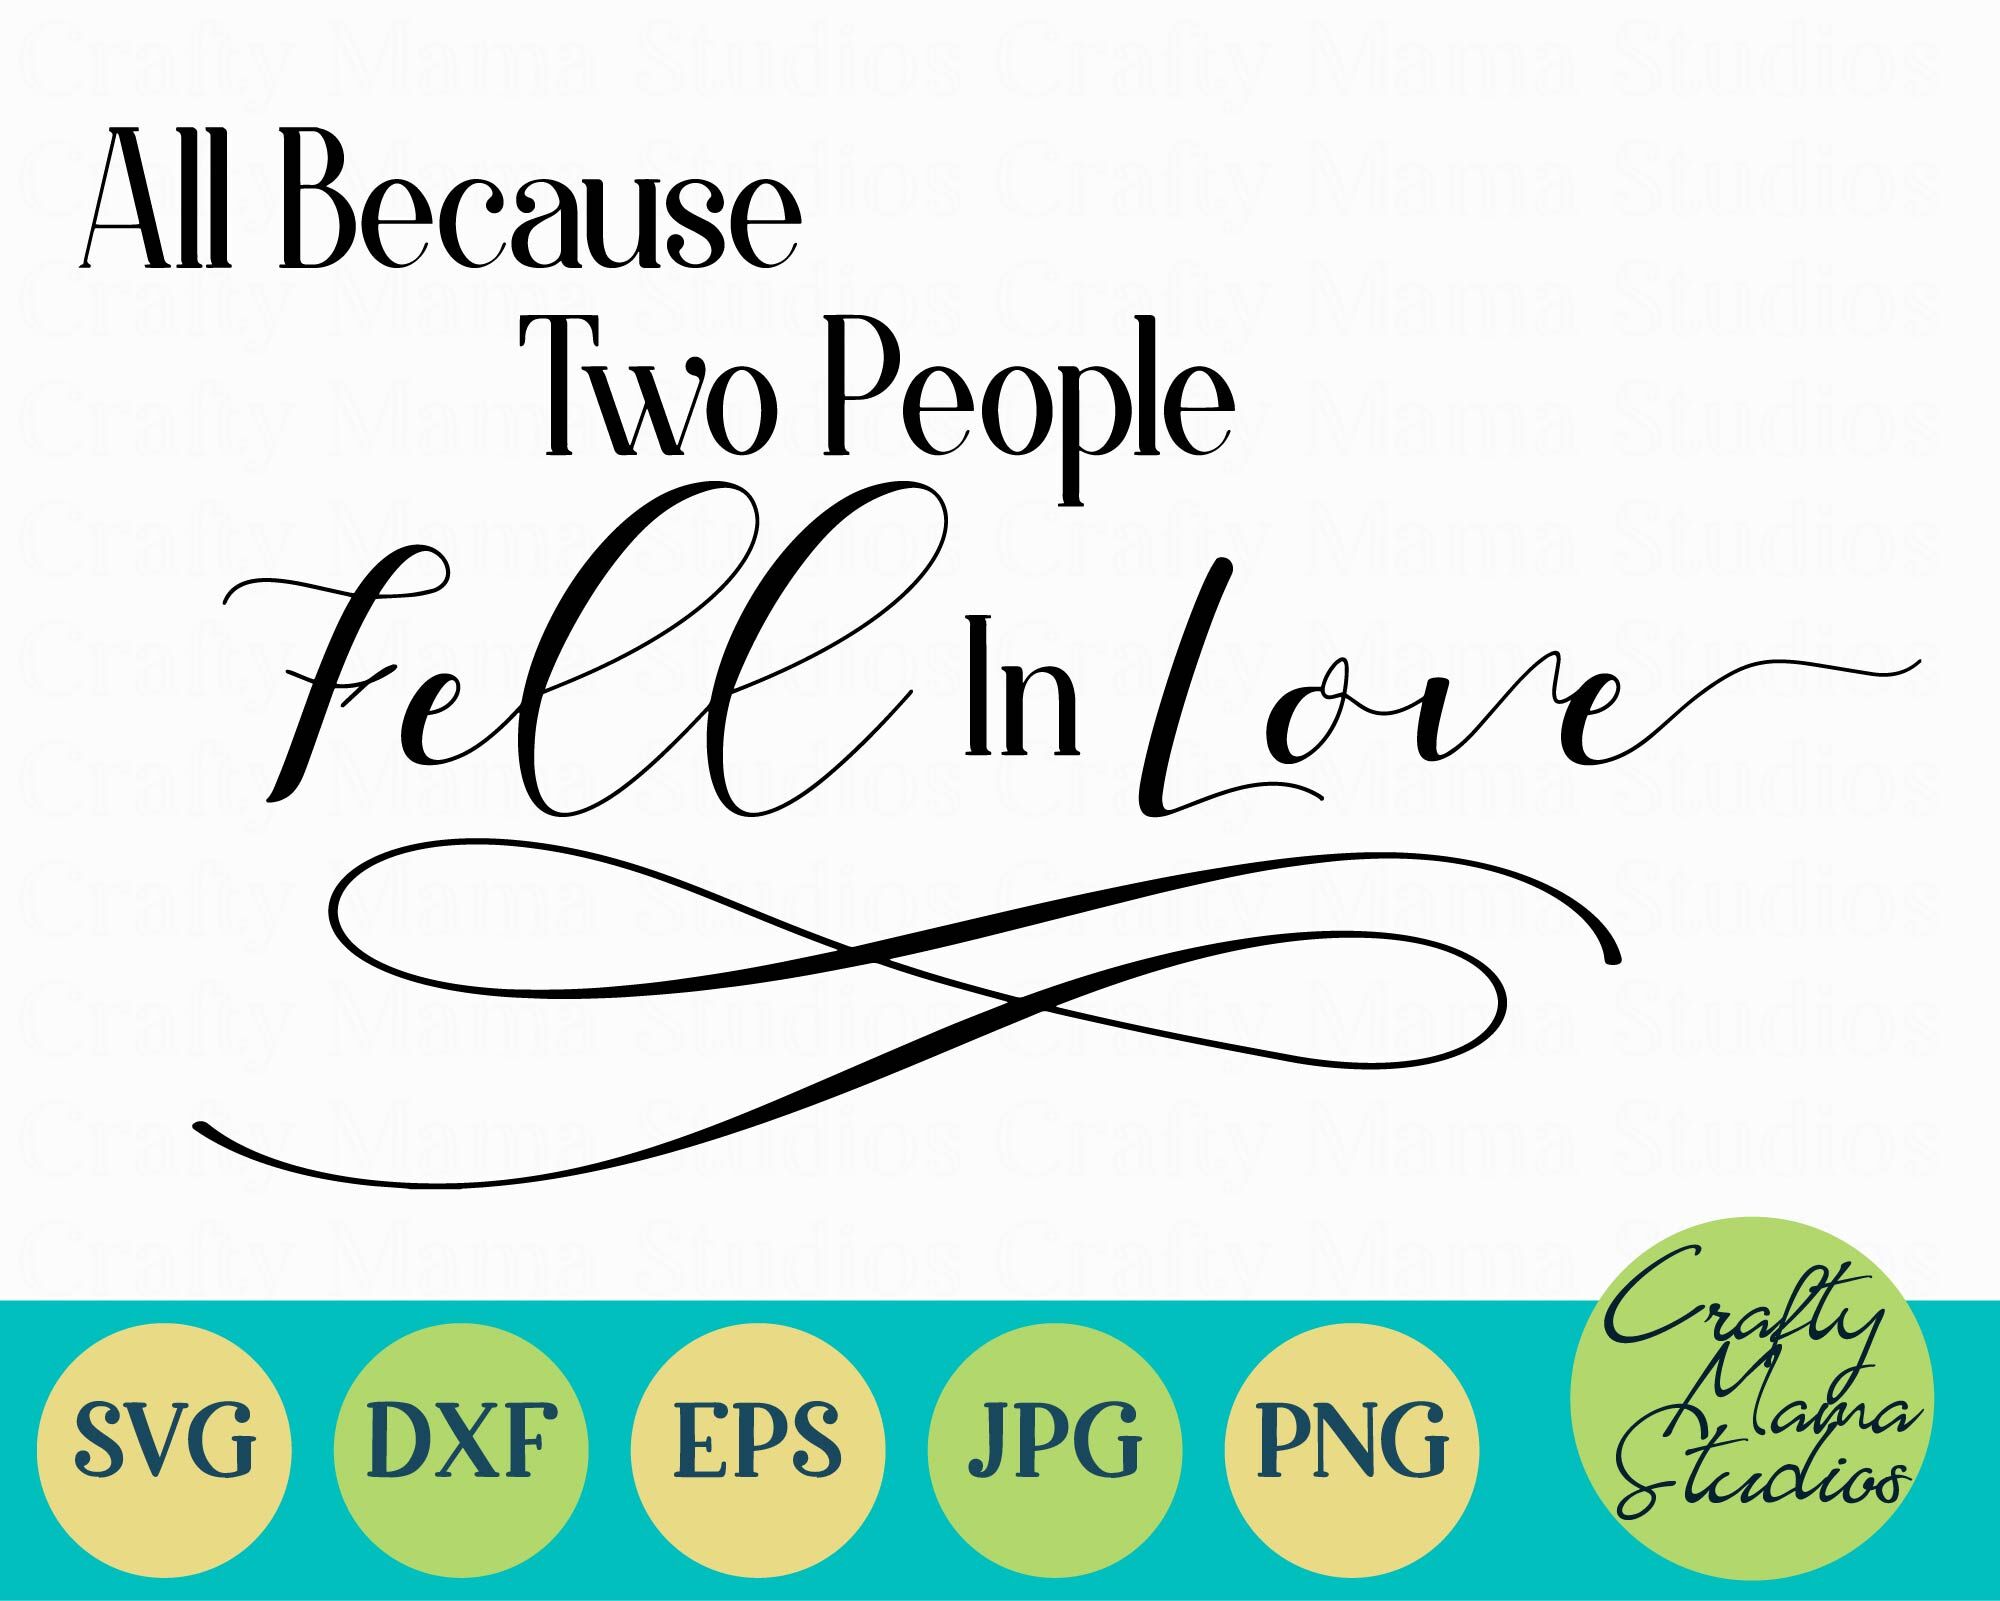 All Because Two People Fell In Love Love Svg By Crafty Mama Studios Thehungryjpeg Com